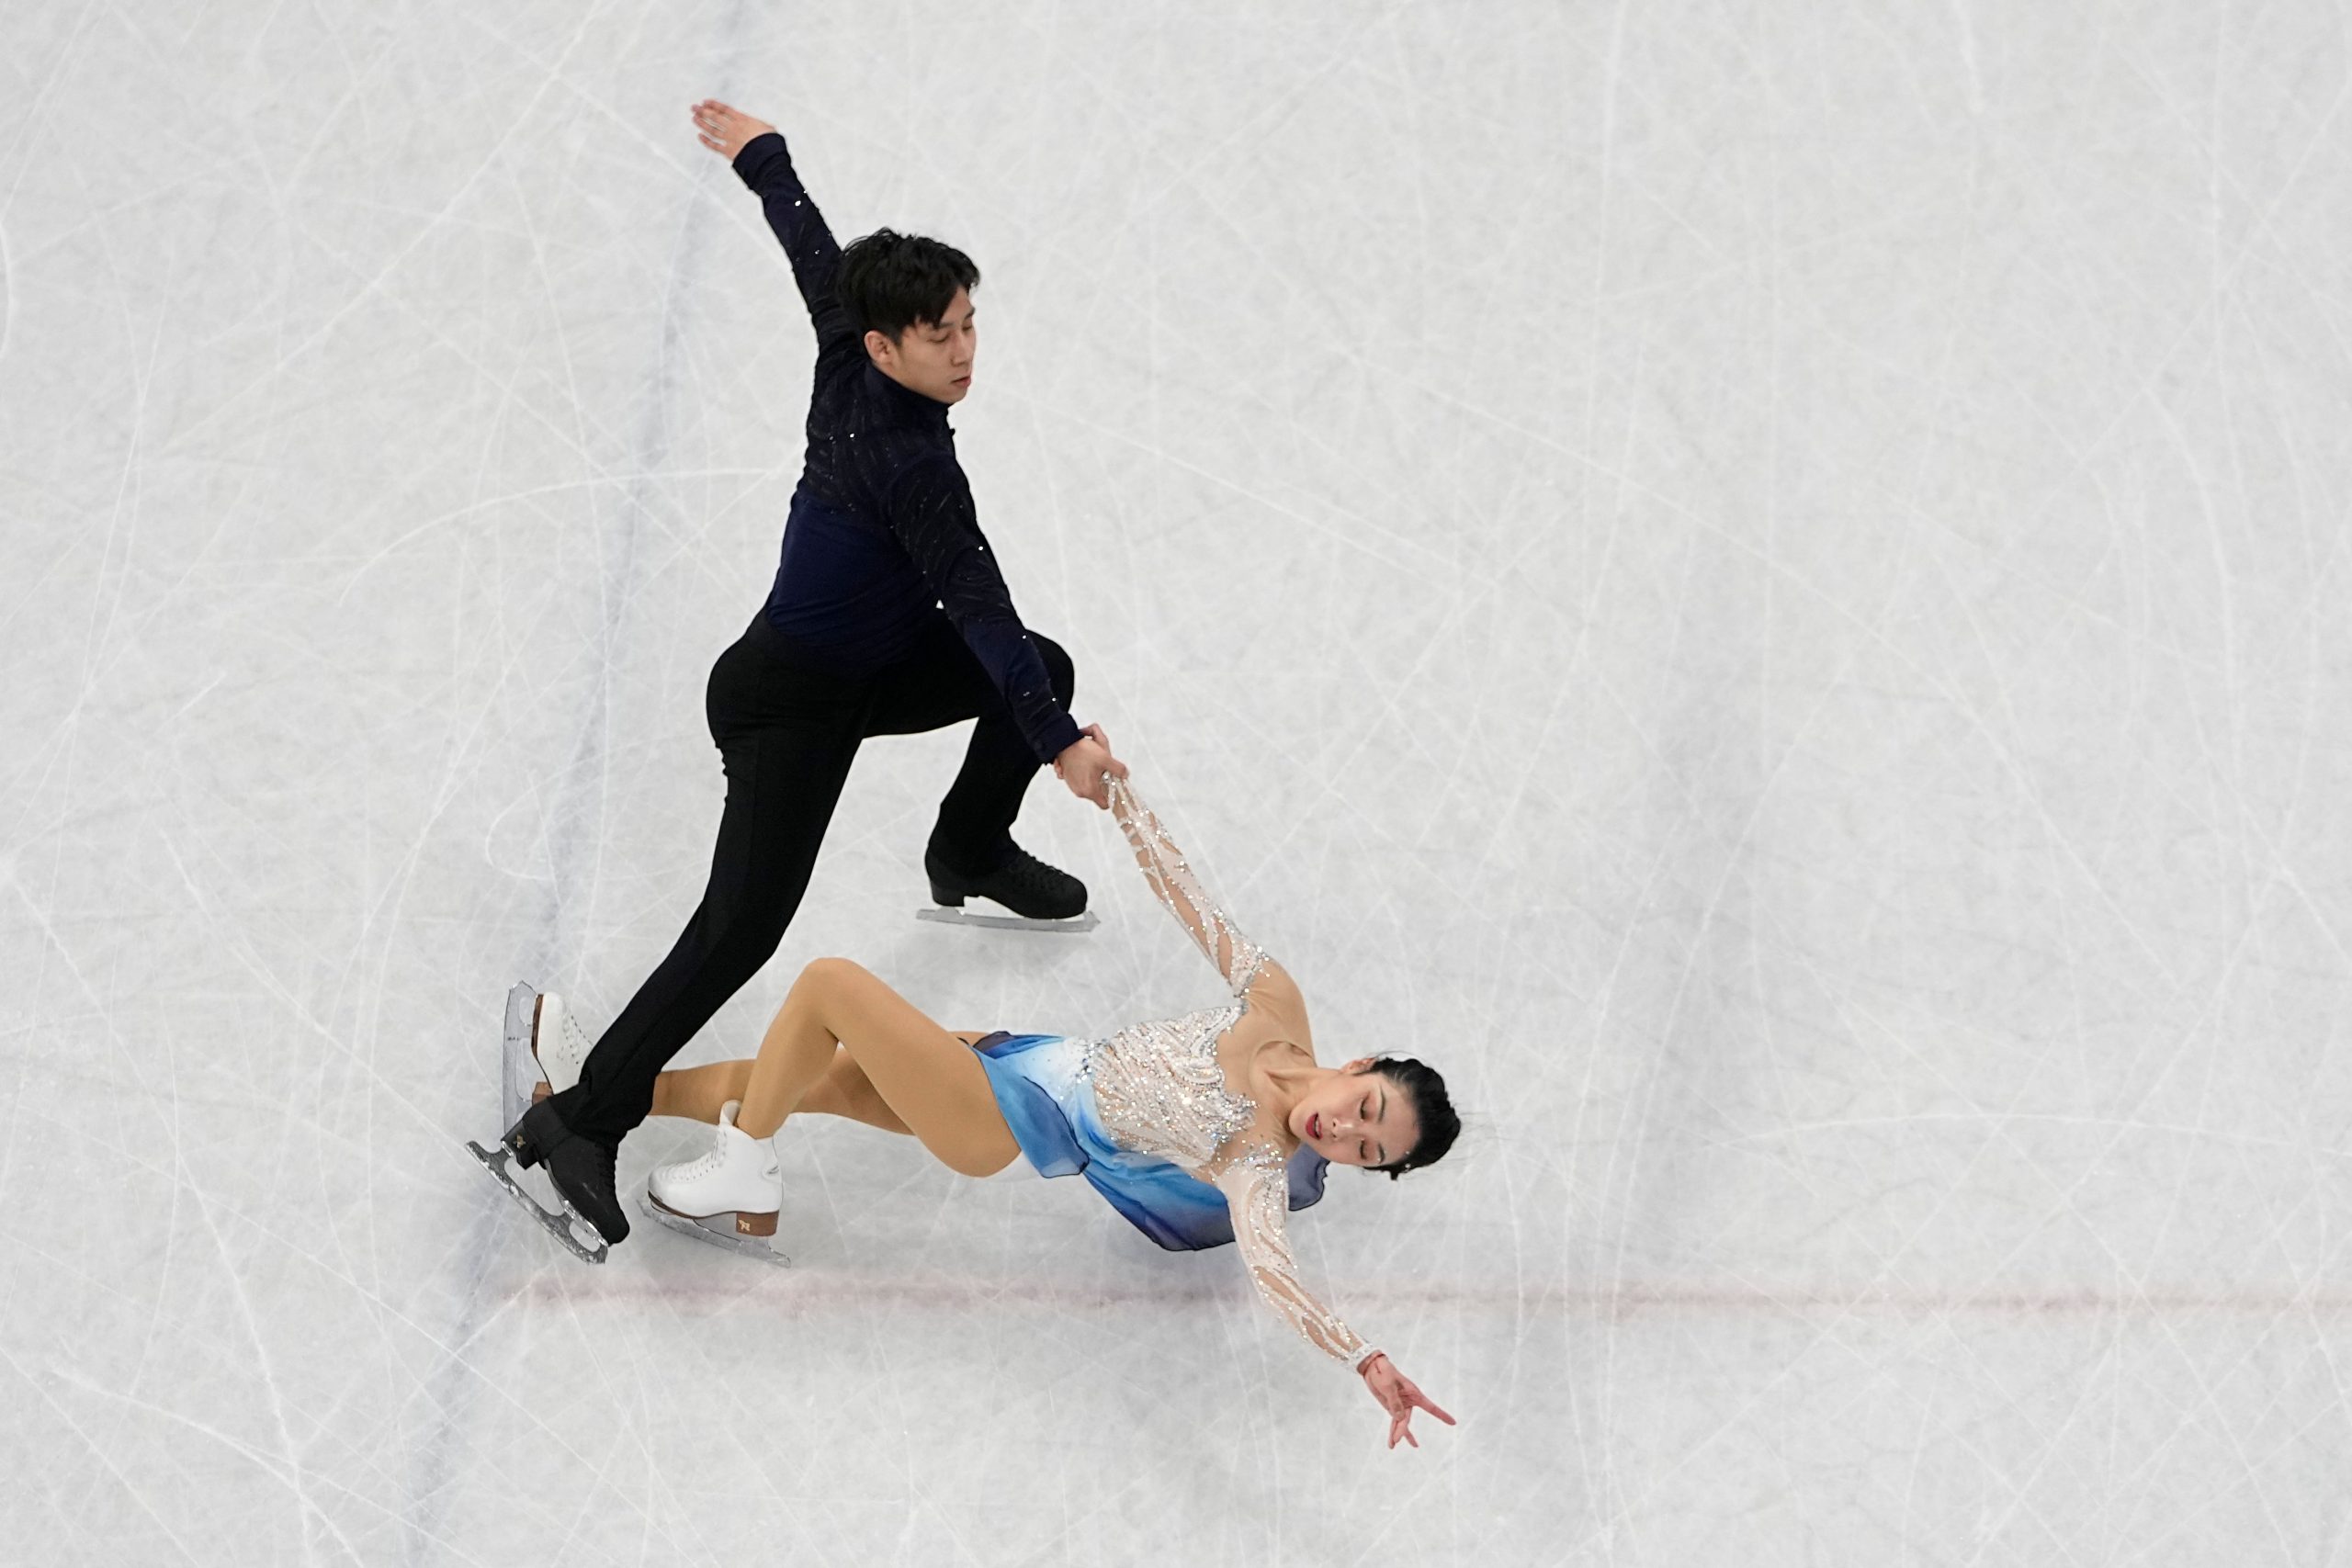 Winter Olympics: Sui Wenjing, Han Cong earn gold at last in pairs figure skating